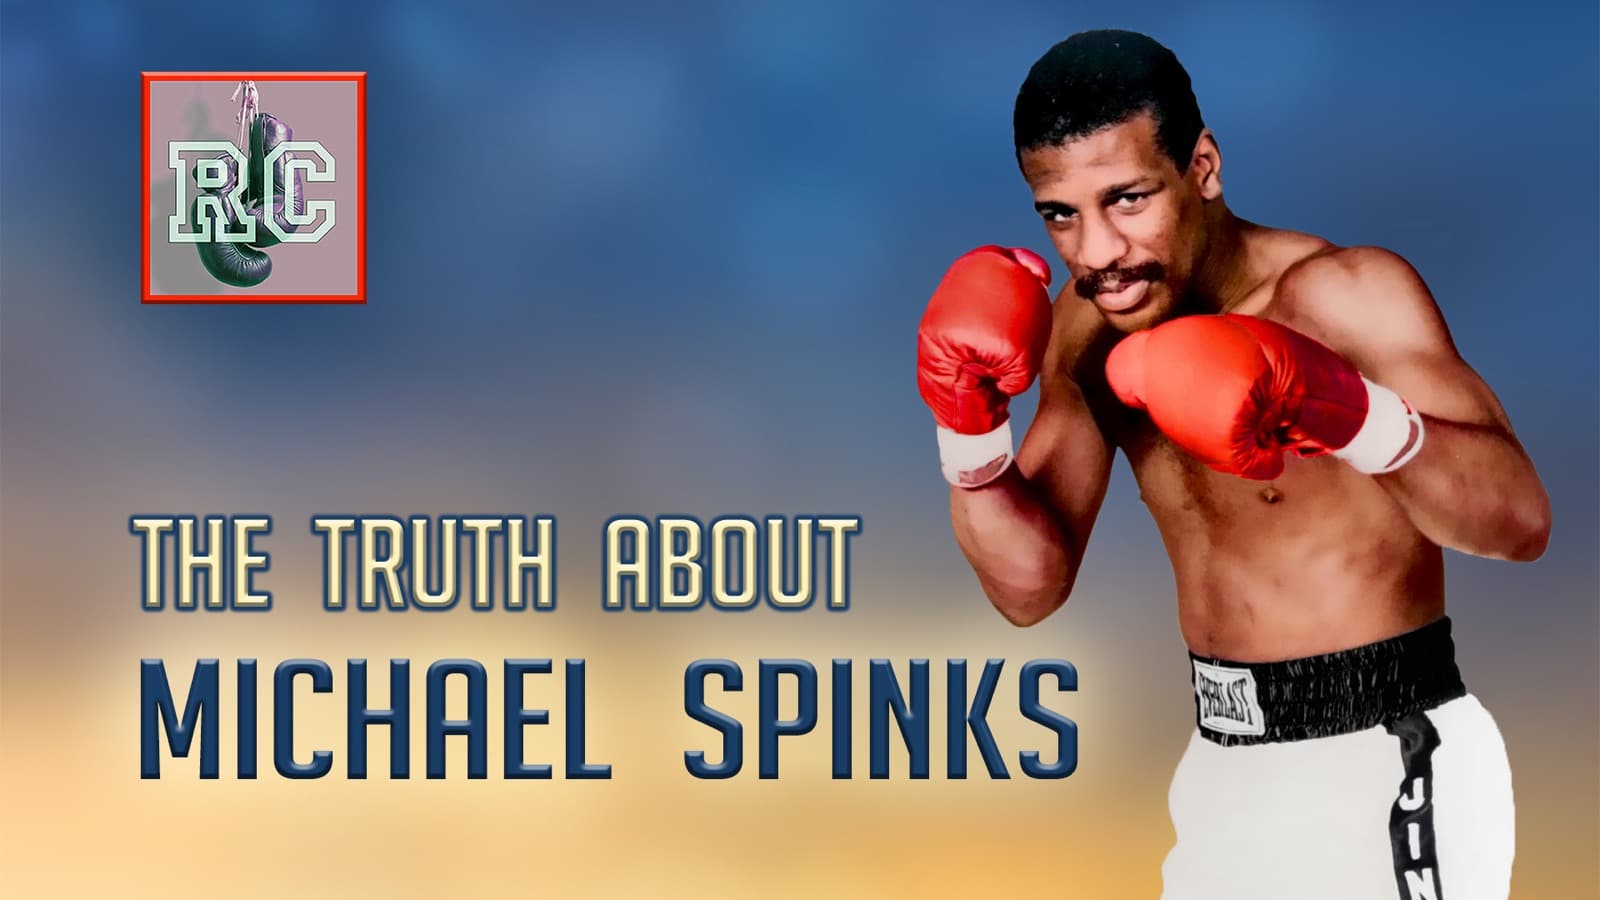 Michael Spinks boxing image / photo